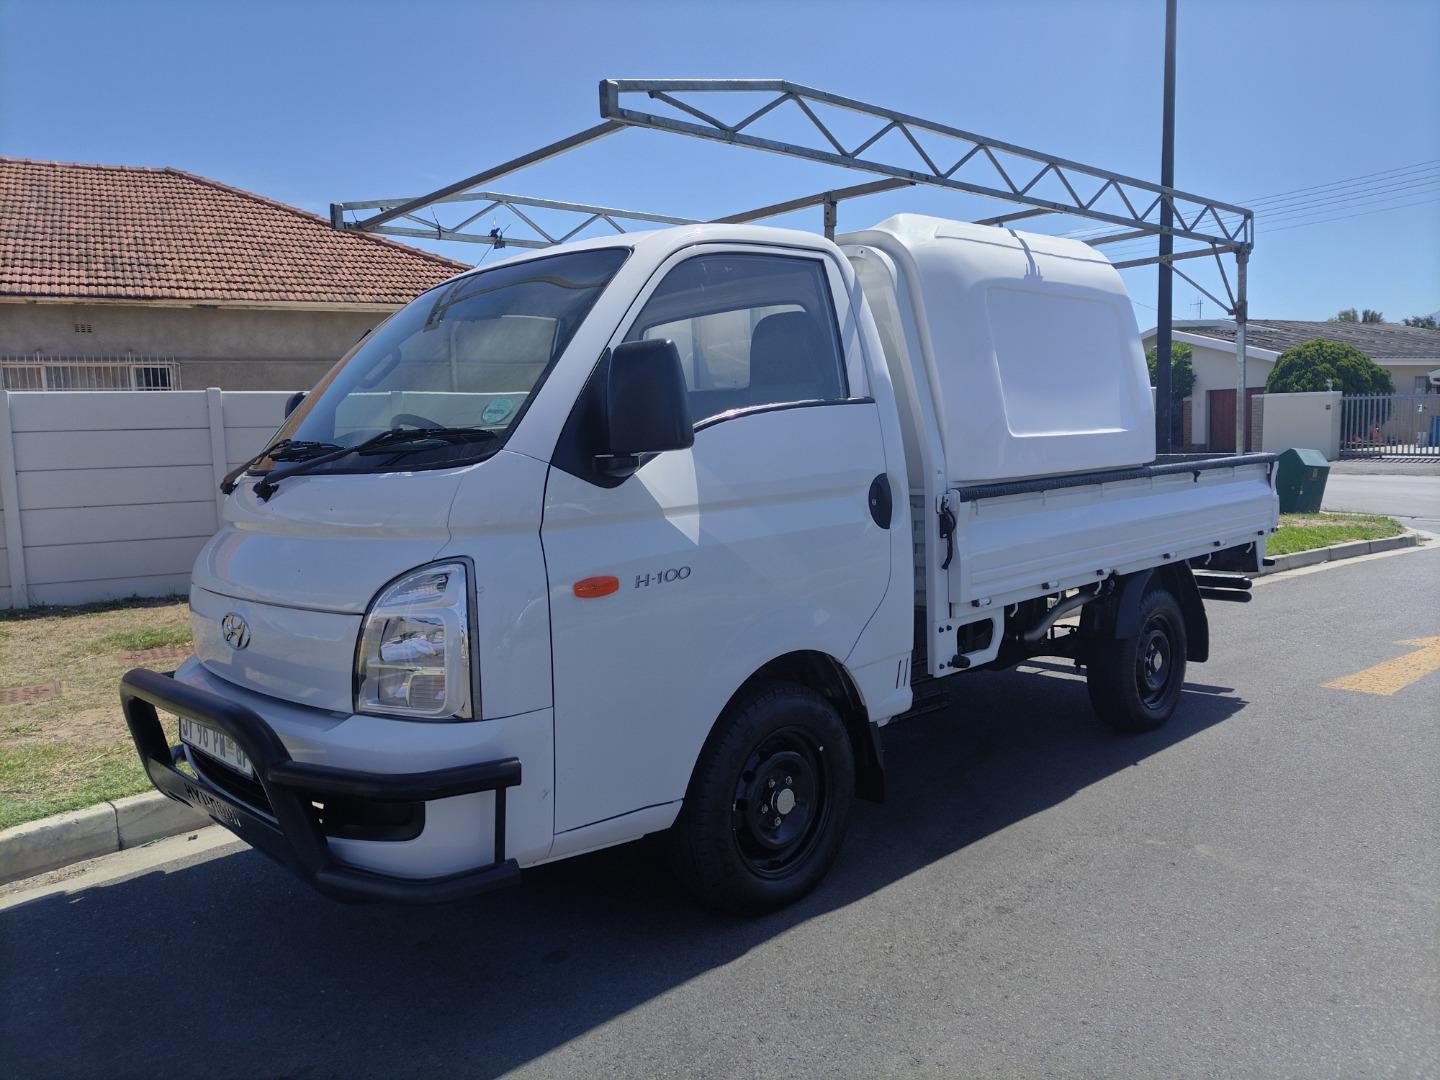 2021 Hyundai H-100 Bakkie 2.6D Chassis Cab For Sale